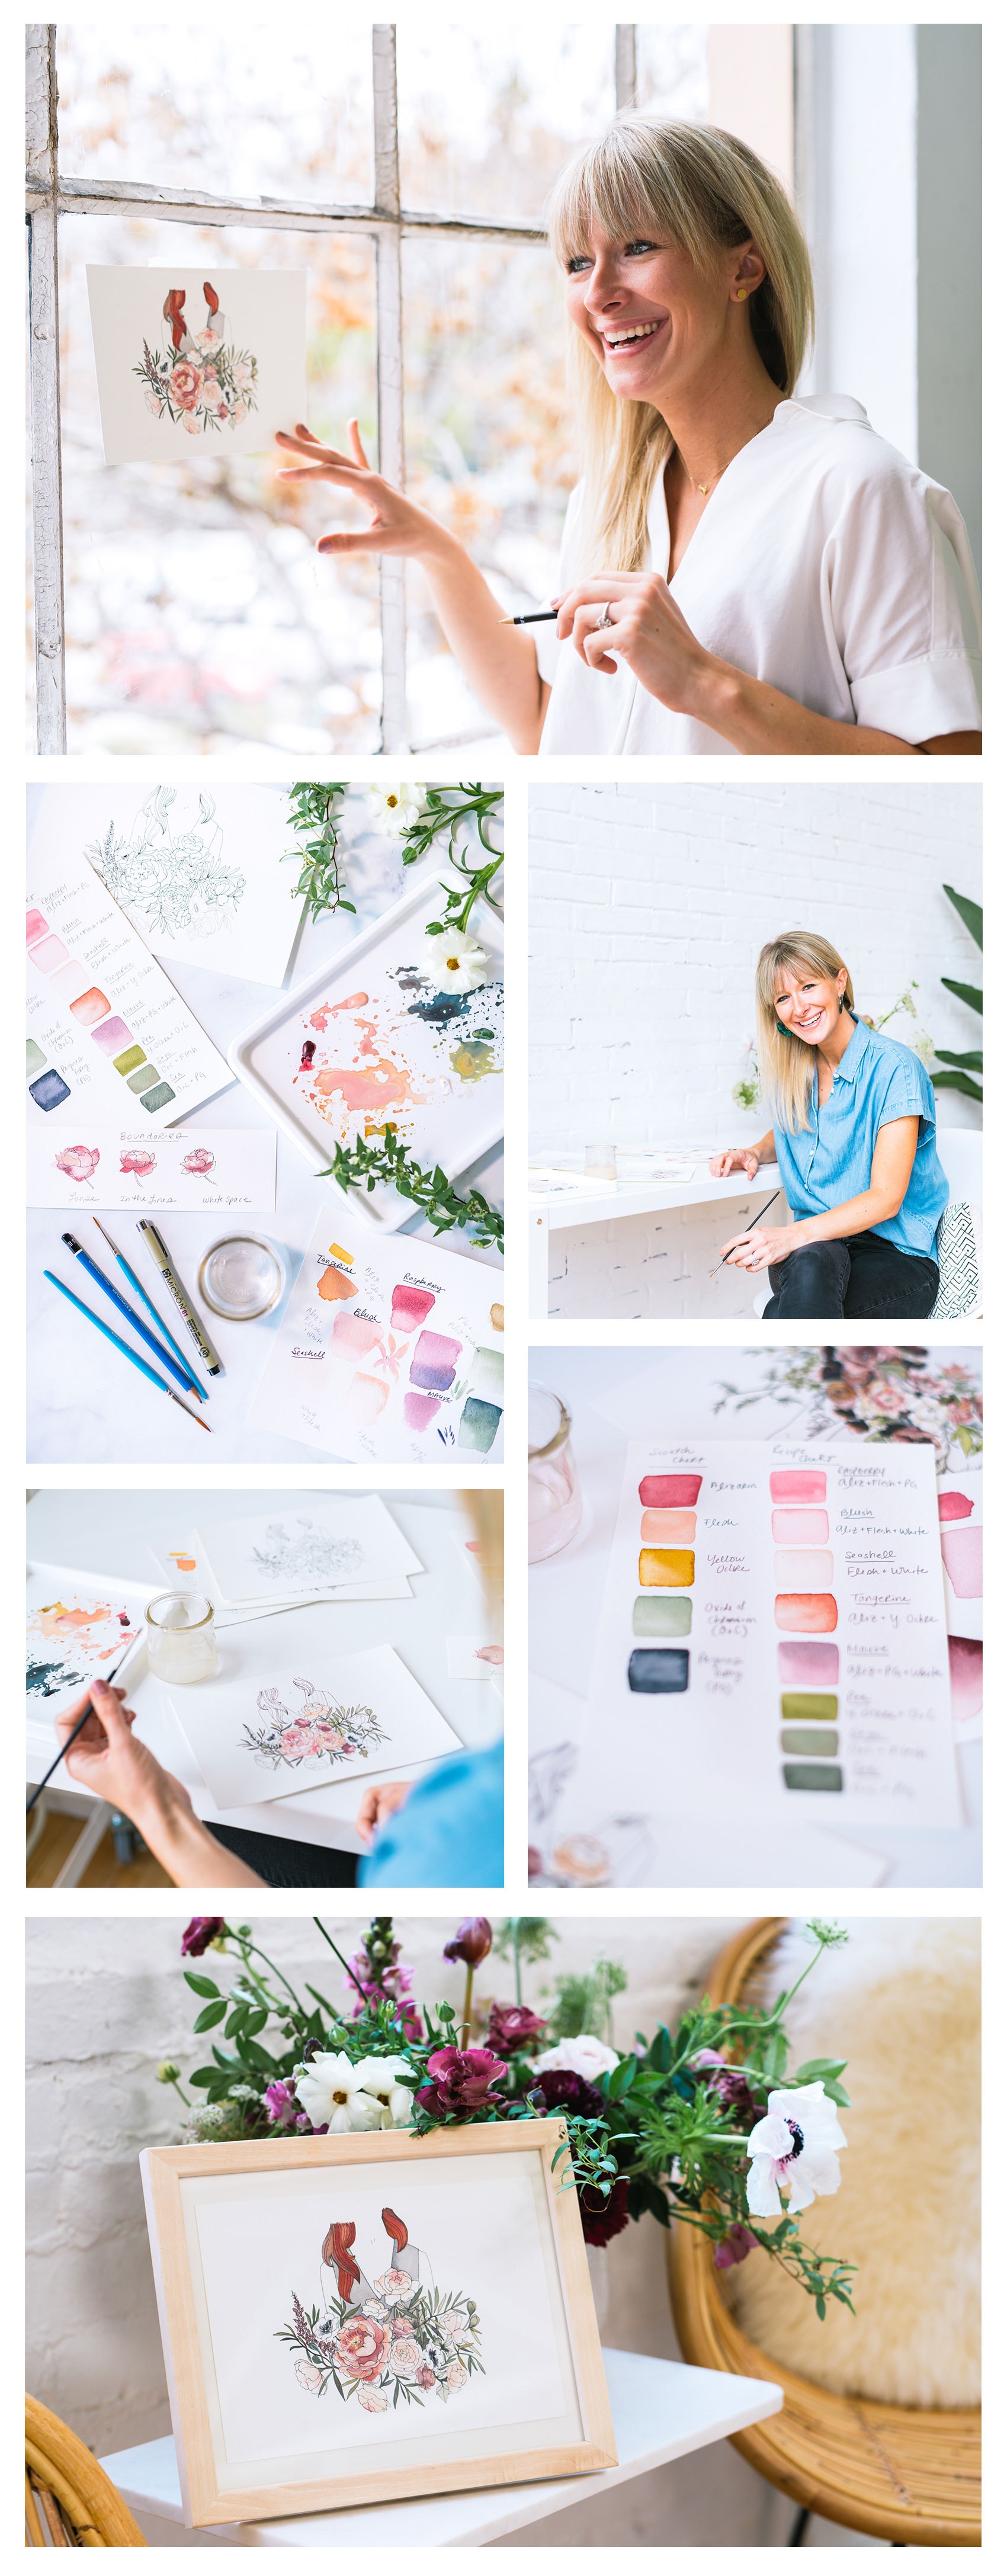 Watercolor & Gouache with Sarah Simon | The Crafter's Box